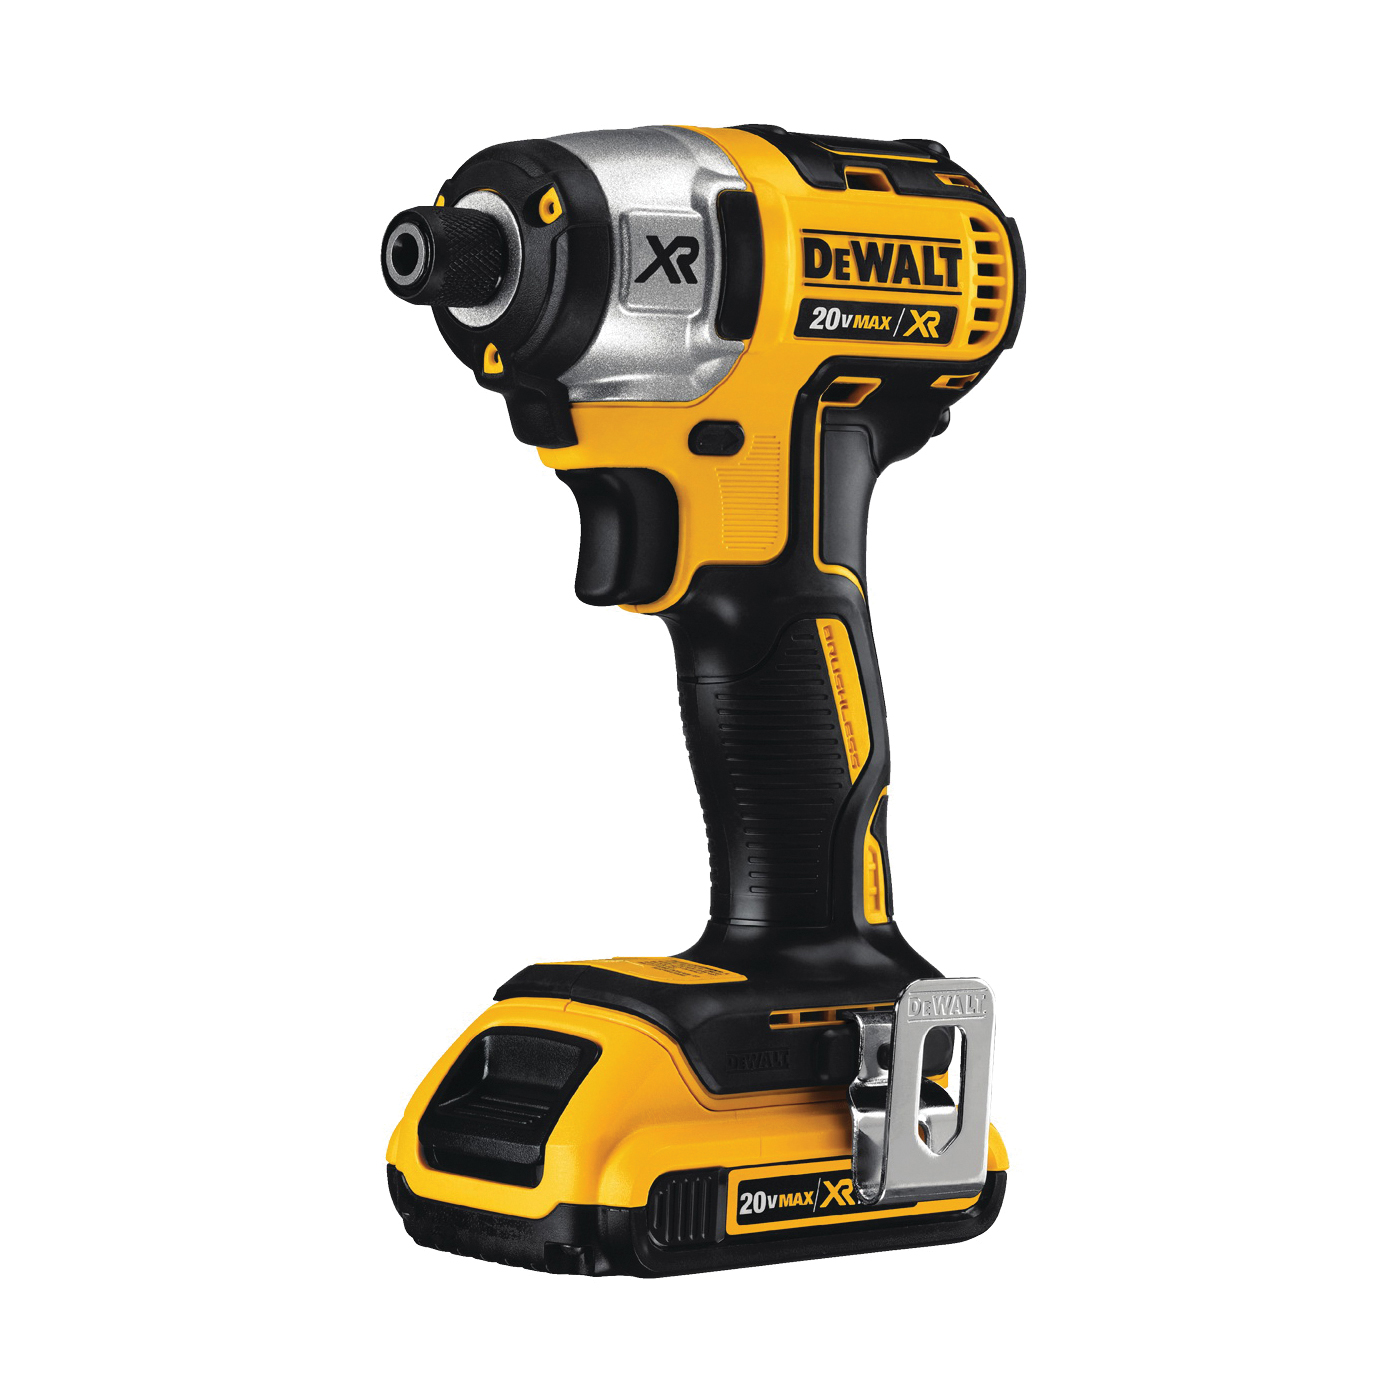 DCF887D2 Impact Driver Kit, Battery Included, 20 V, 2 Ah, 1/4 in Drive, Hex Drive, 3600 ipm